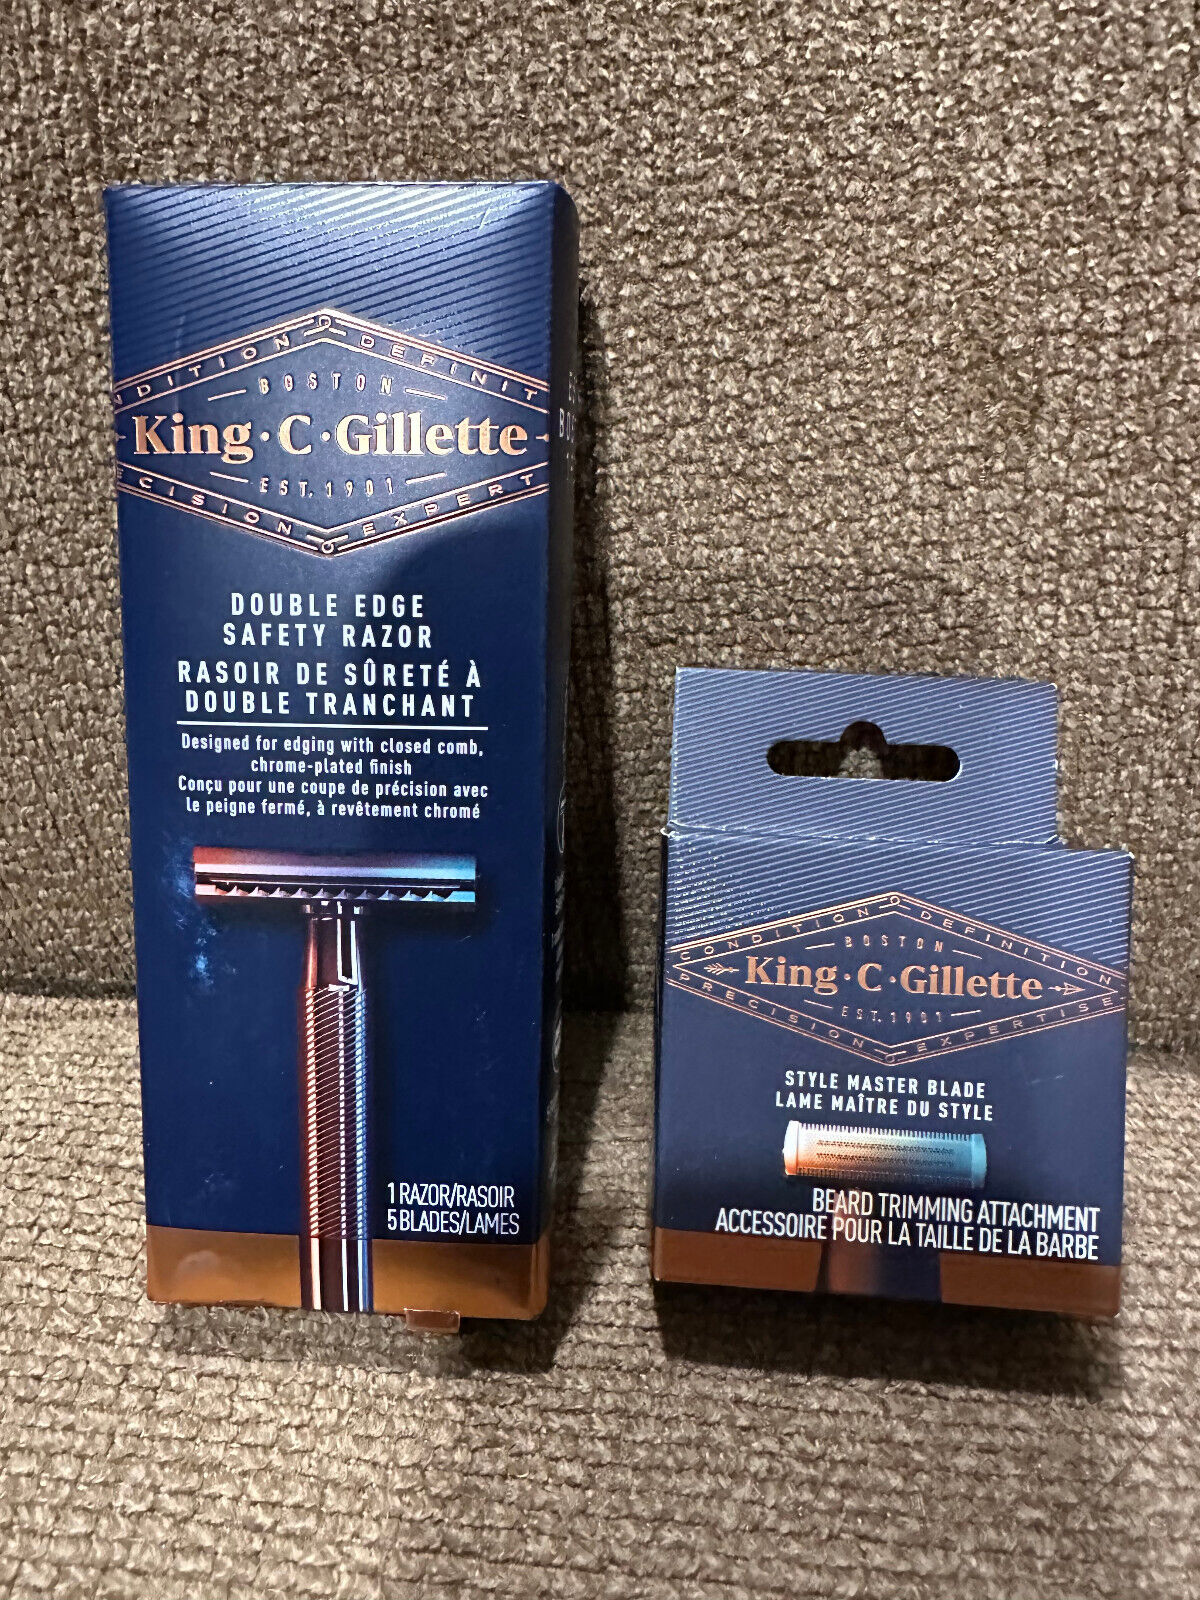 KING C GILLETTE Men s Double Edge Safety Razor with 5 blades ,style master blade